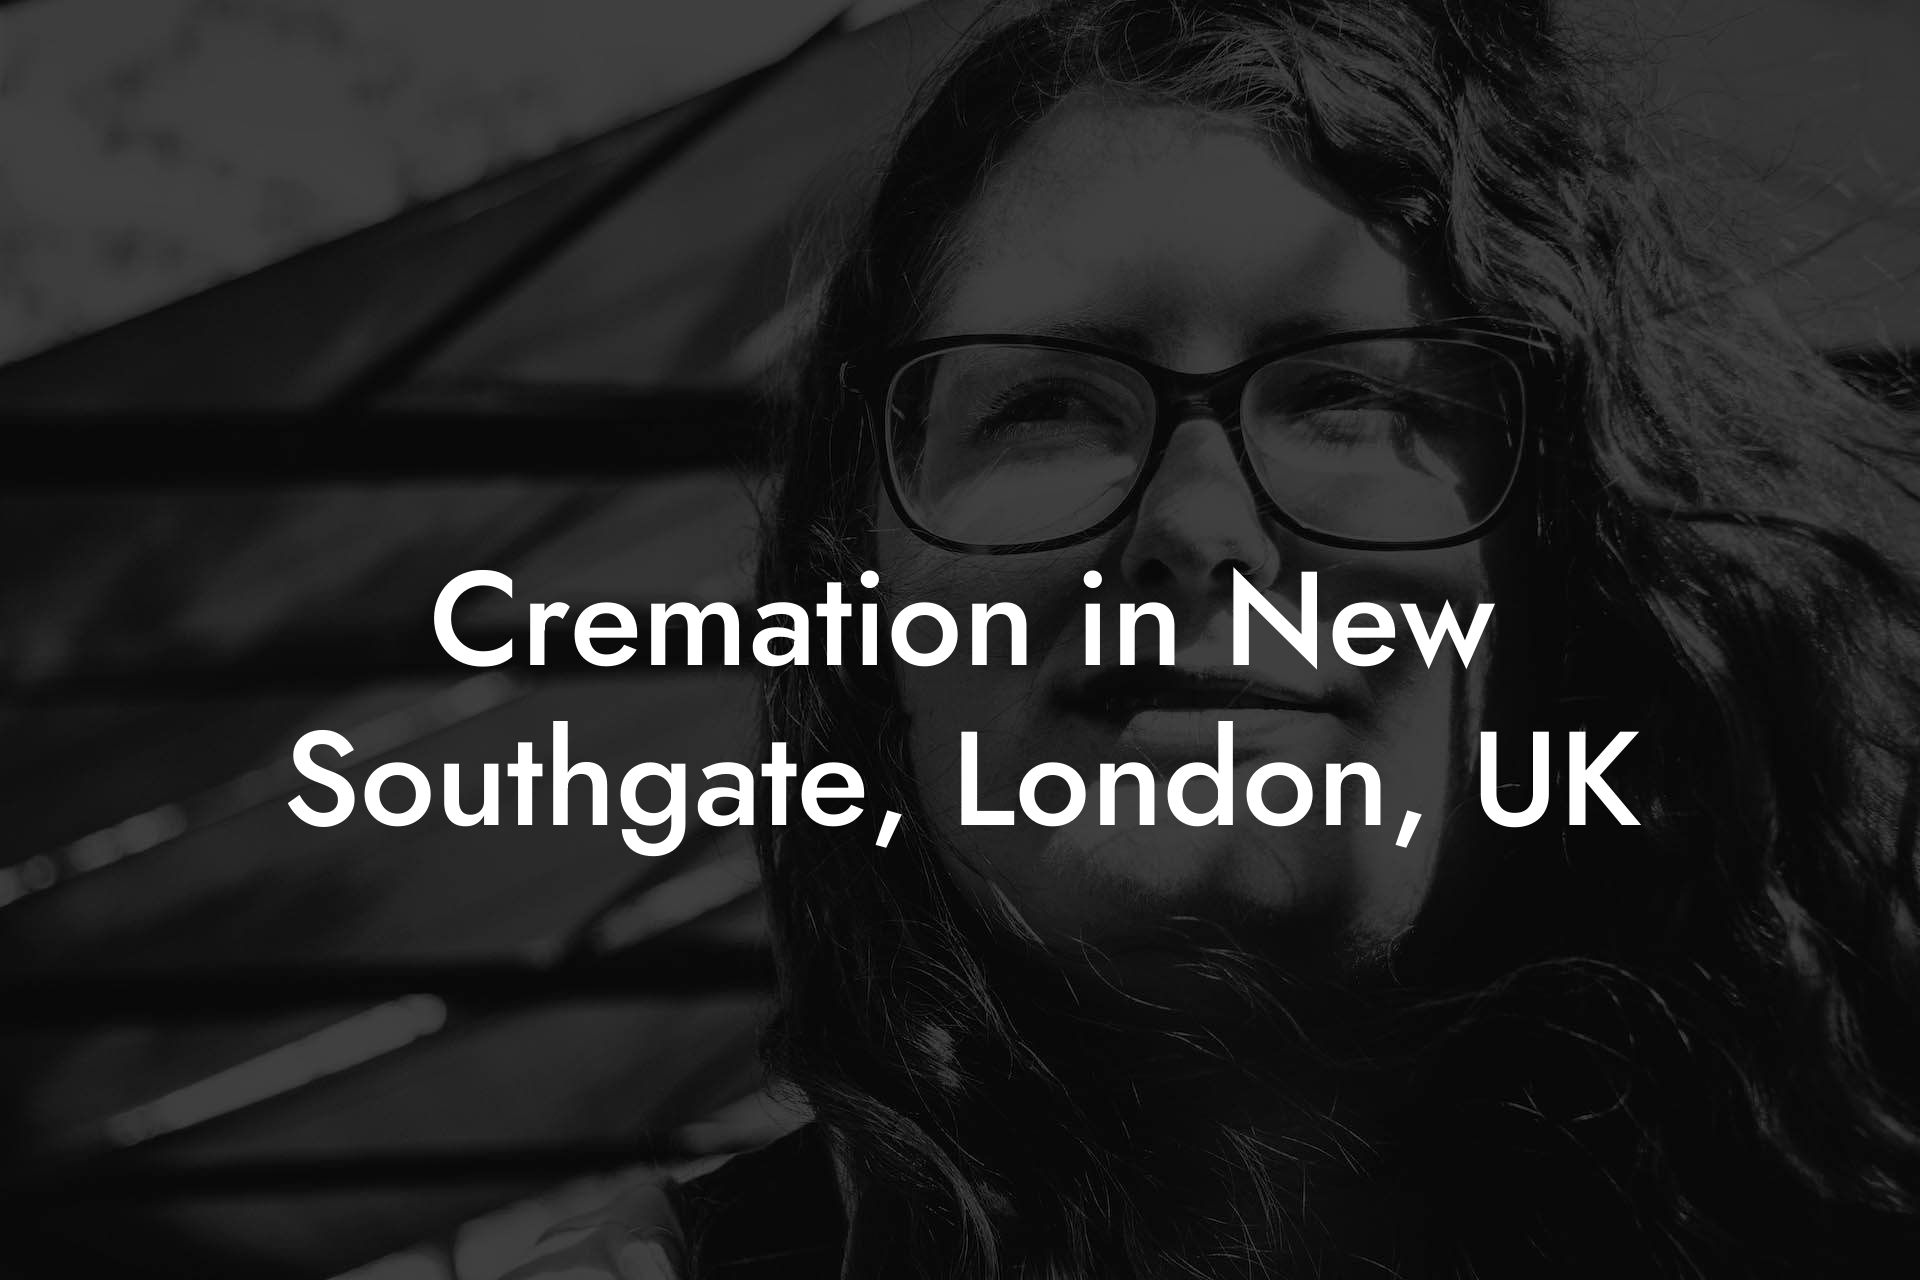 Cremation in New Southgate, London, UK